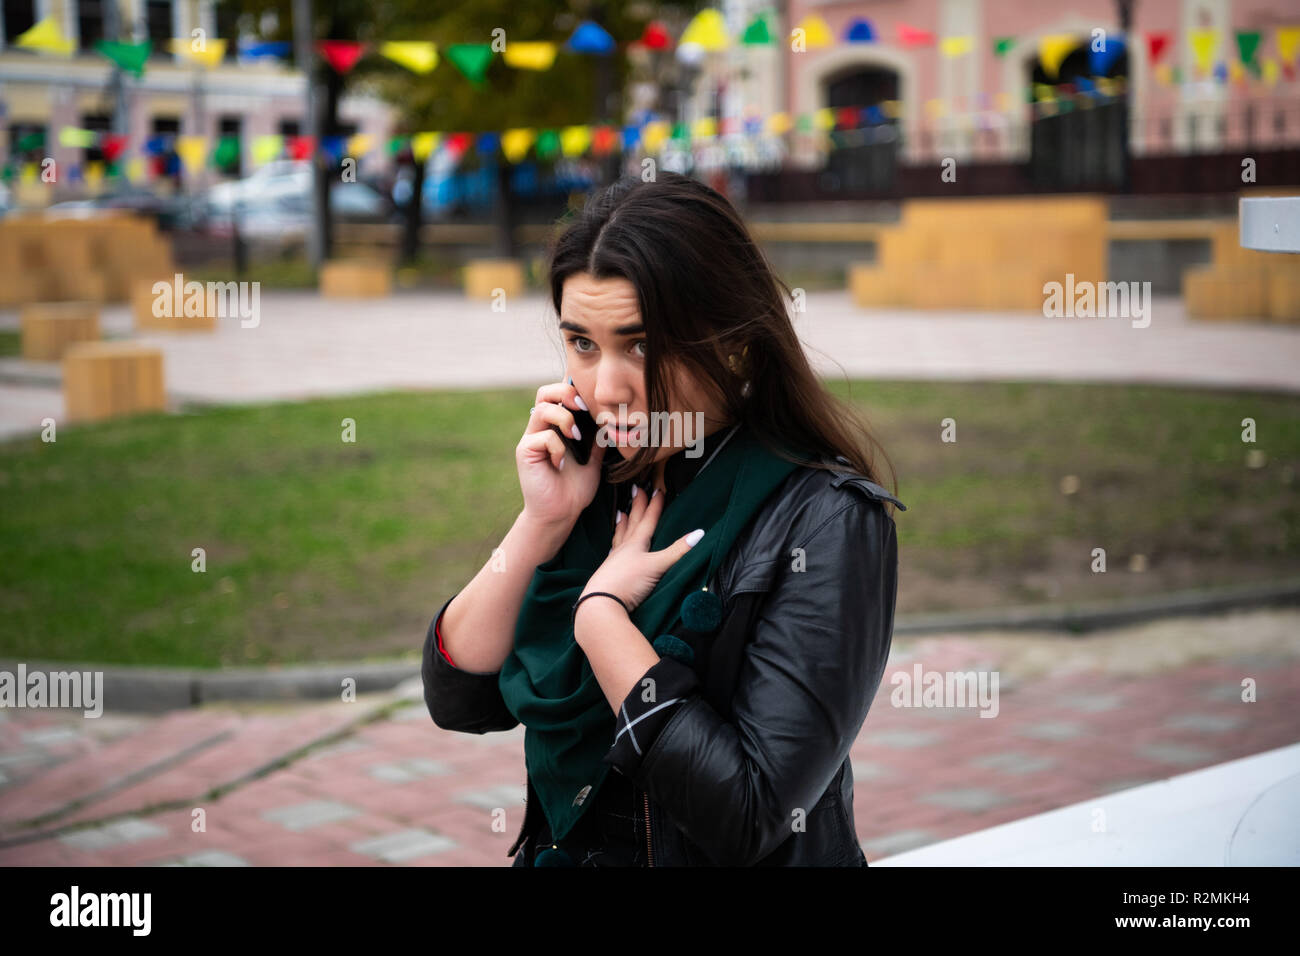 Woman with serious expression talking on telephone. Stock Photo